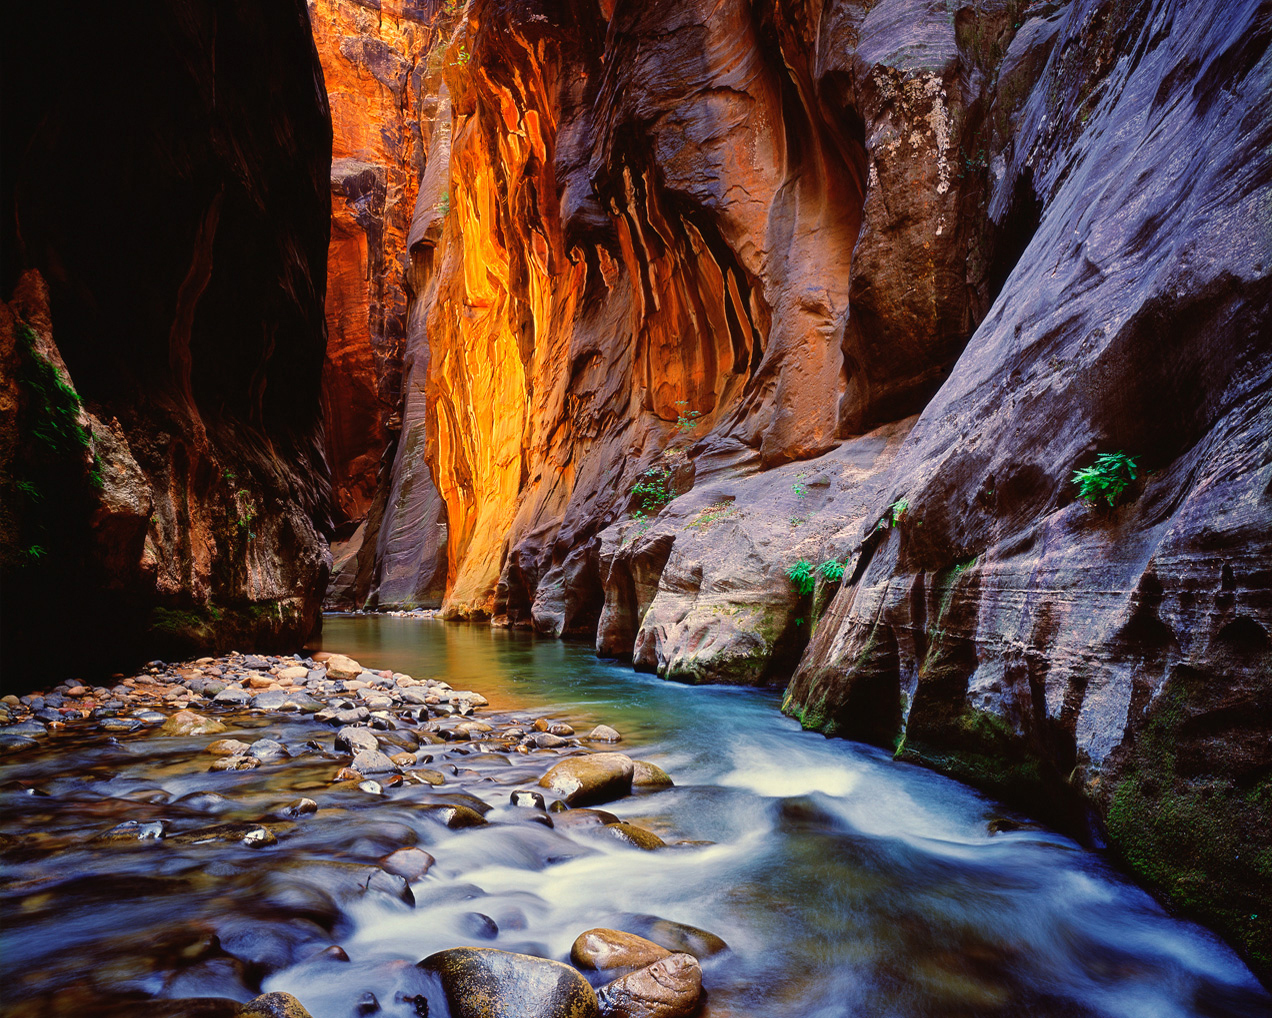 Virgin River in slot canyon photo at Zion National Park